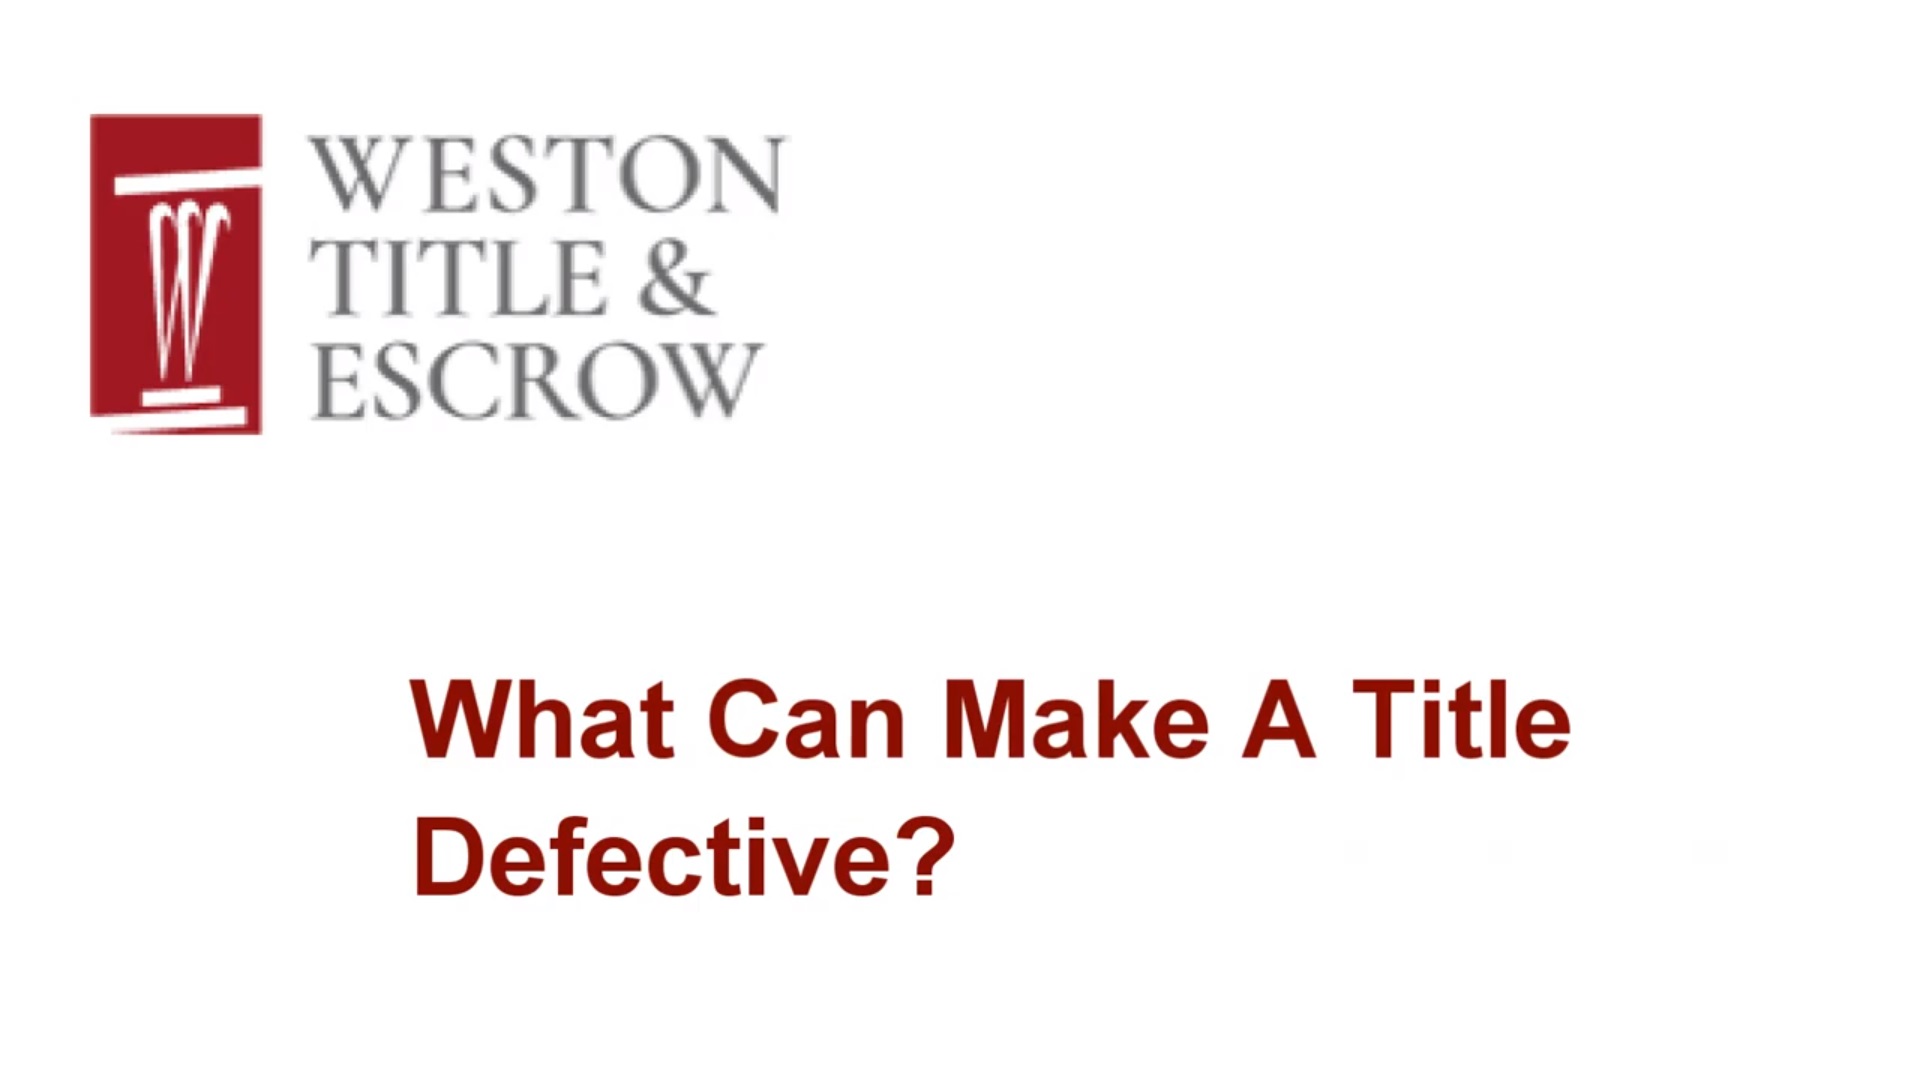 What Can Make A Title Defective?